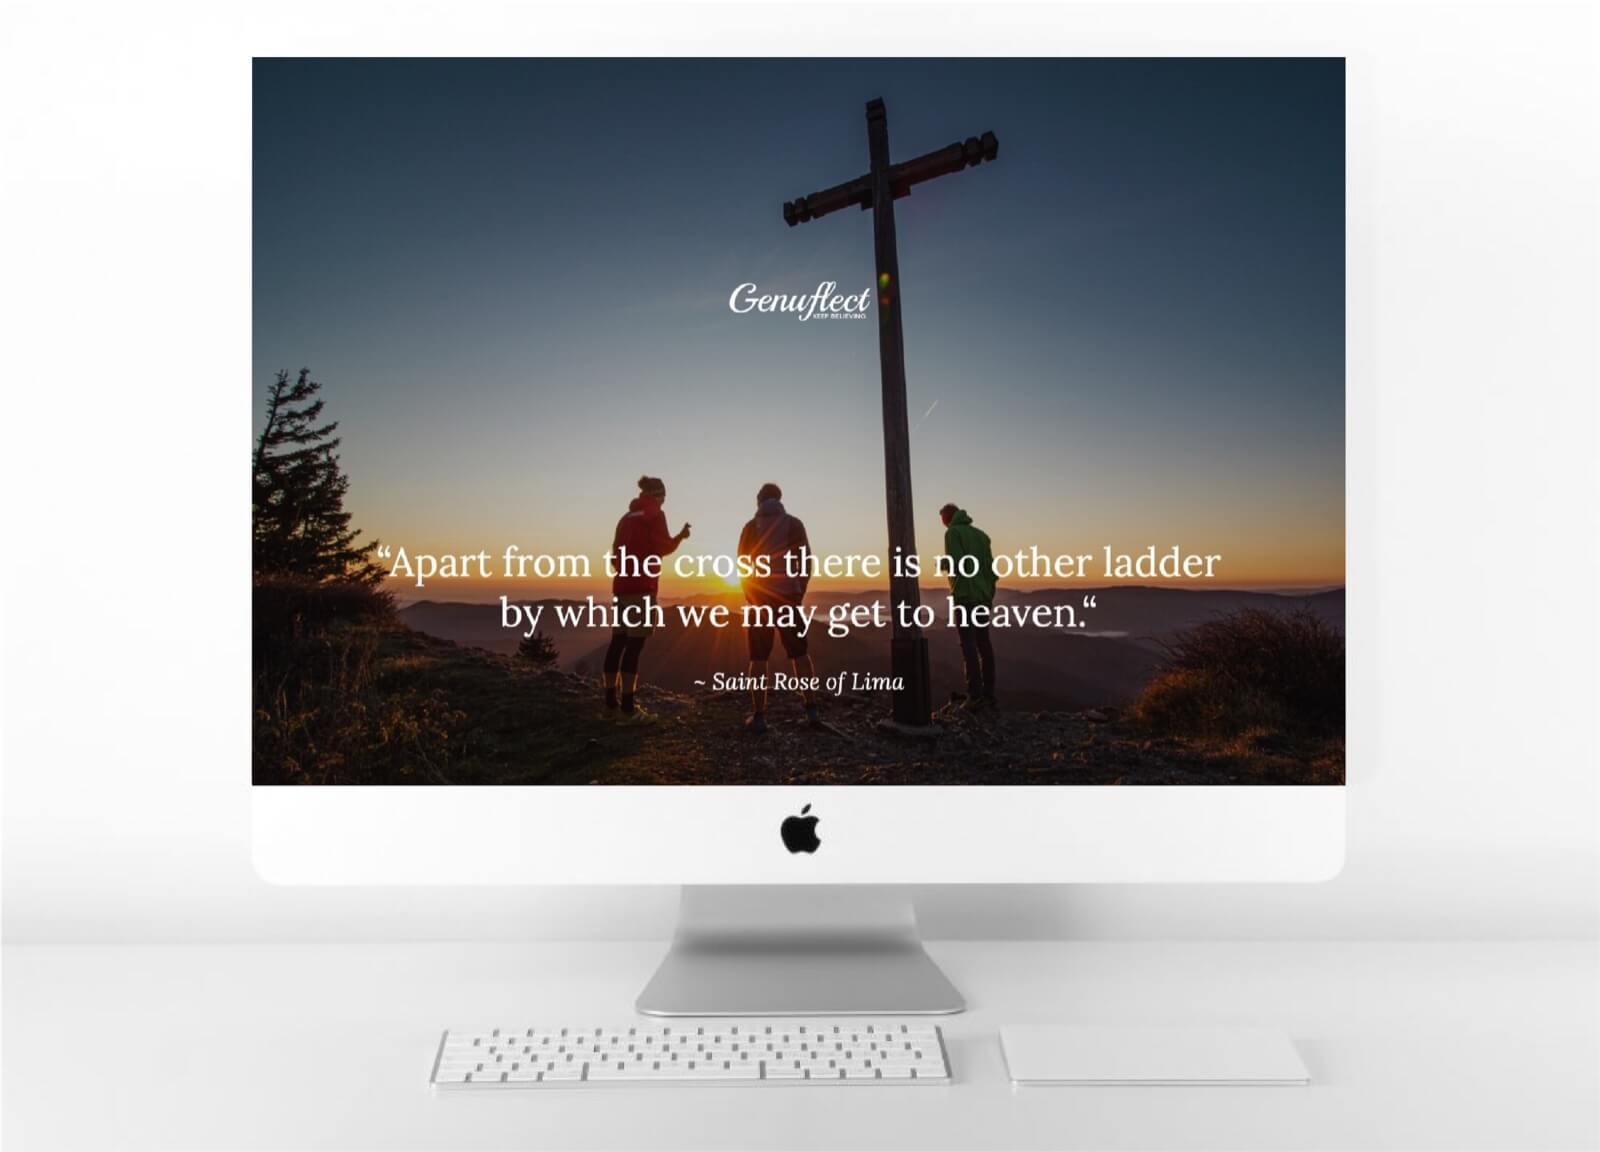 Genuflect - Computer with image on background of Three people and a wooden cross on a mountaintop at sunrise